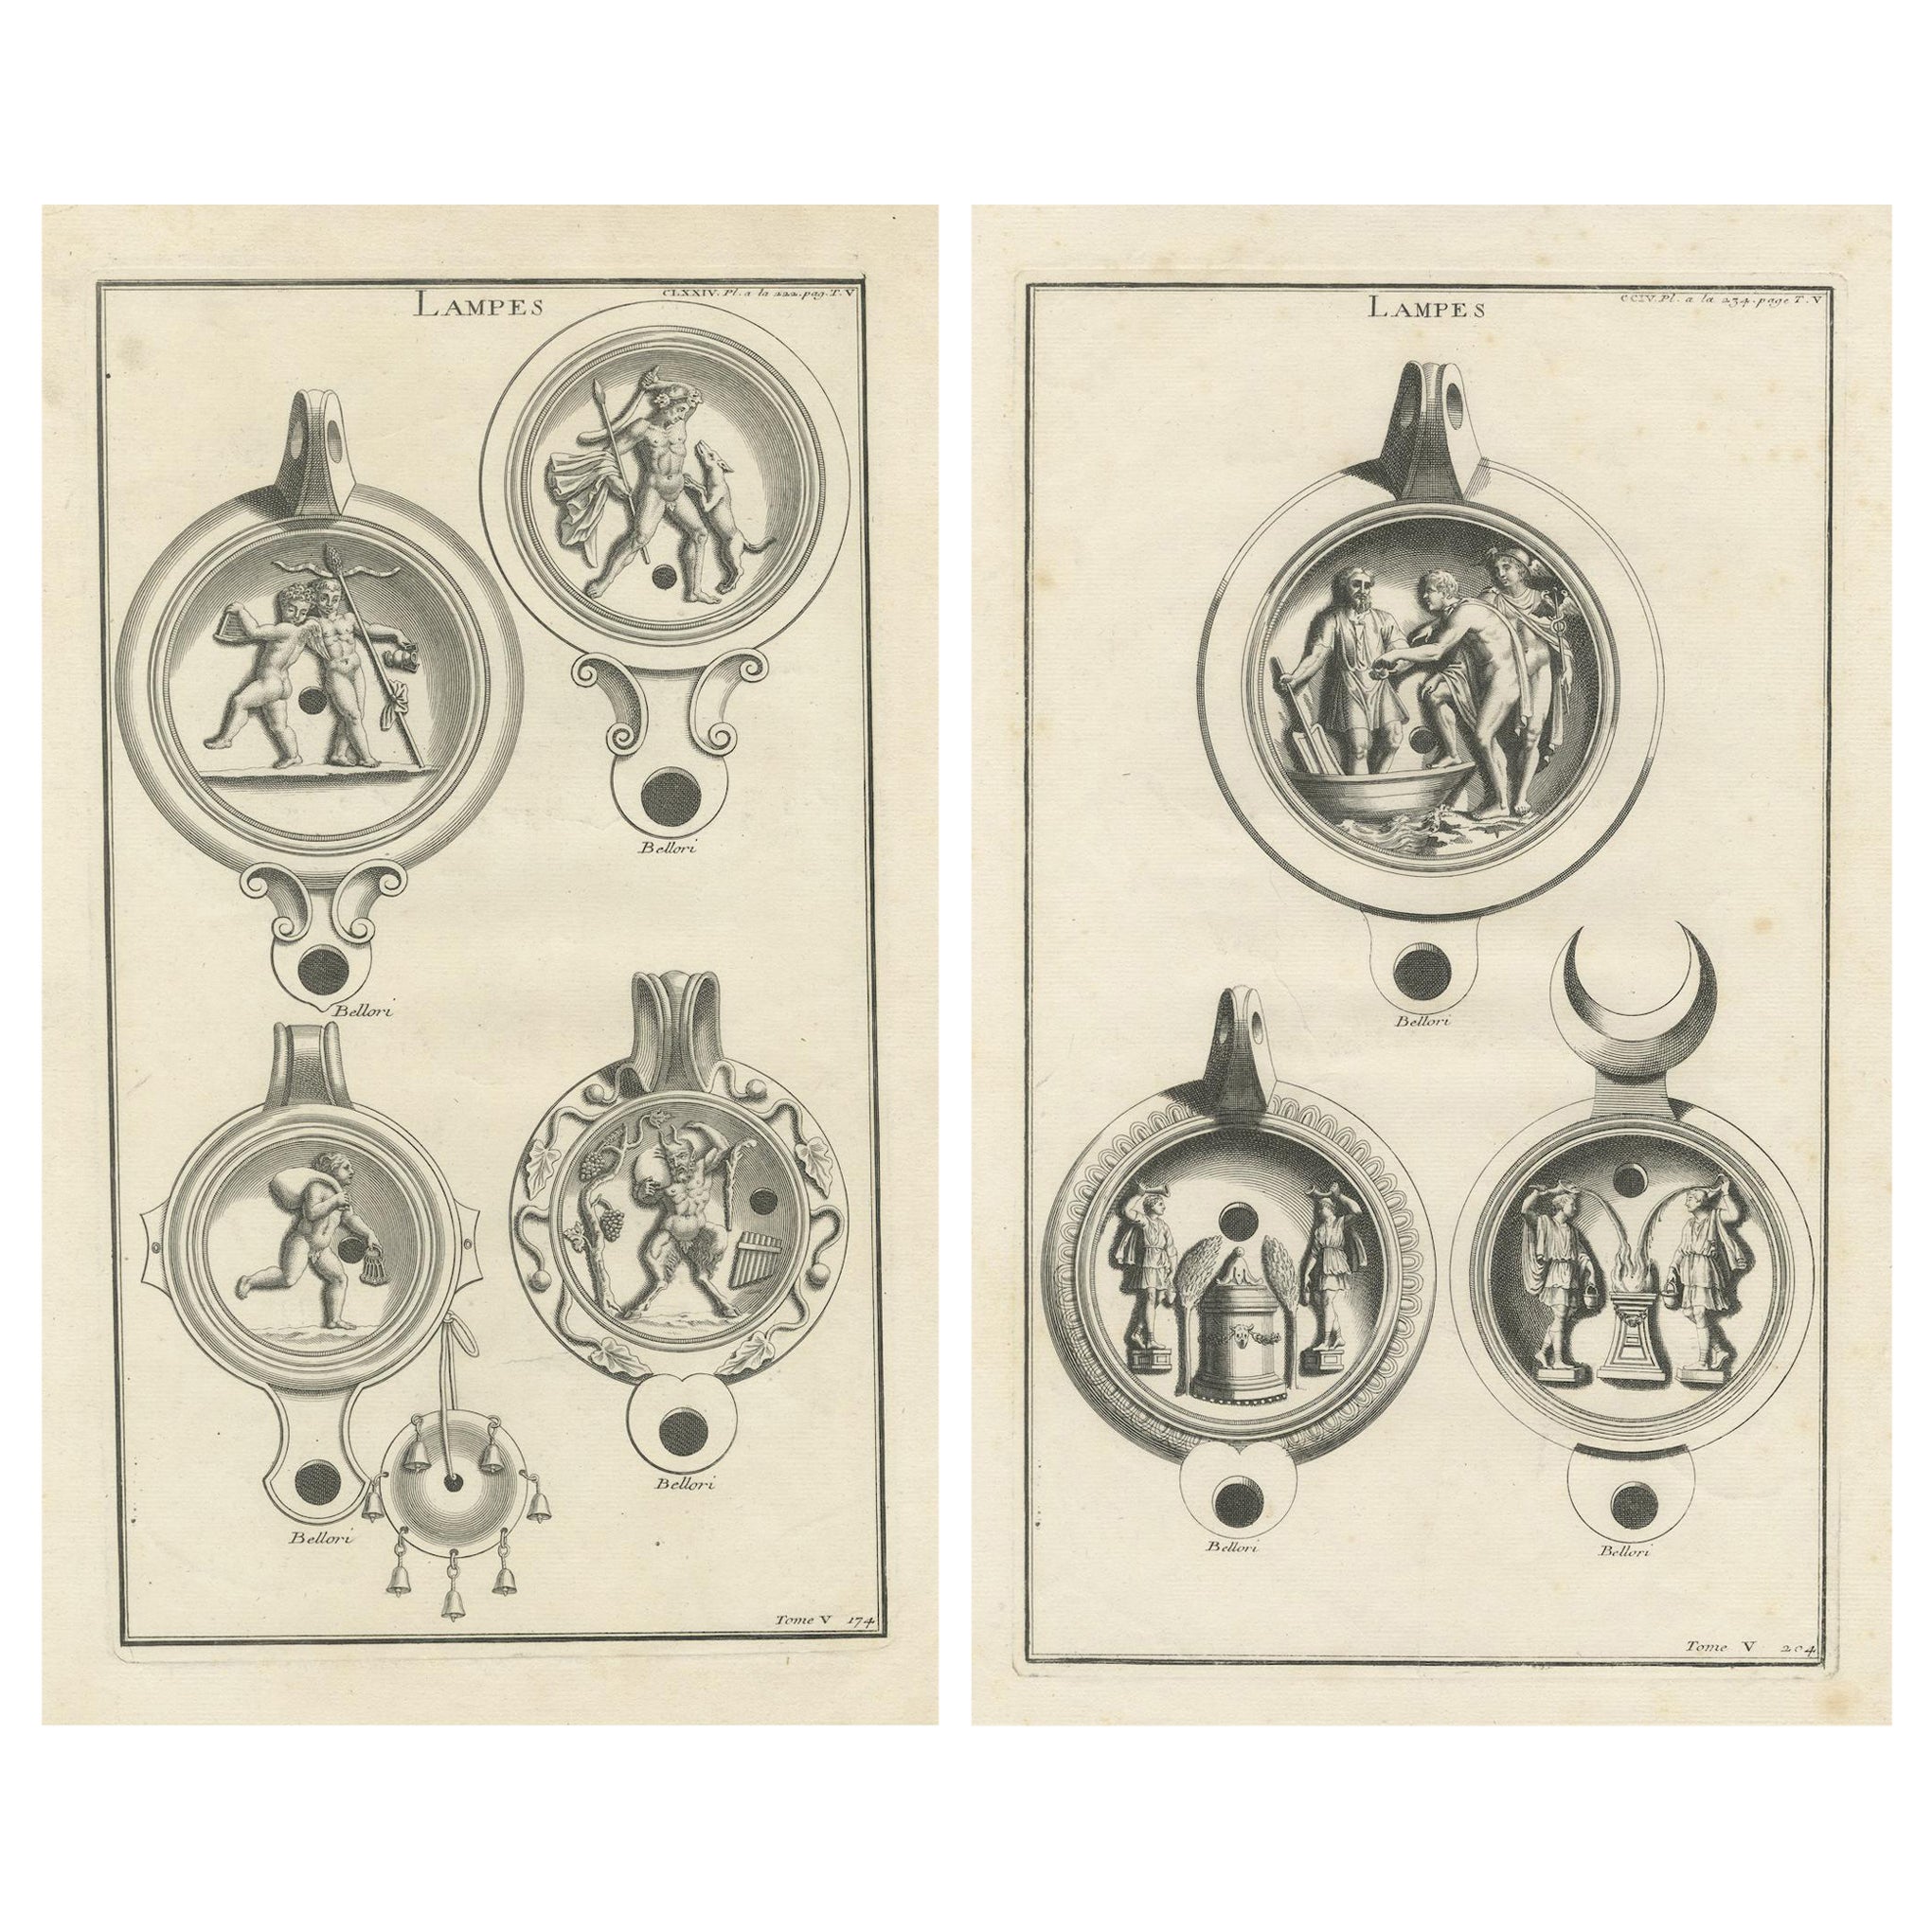 Ancient Lamps in Art: Montfaucon's 18th-Century Engravings, circa 1722